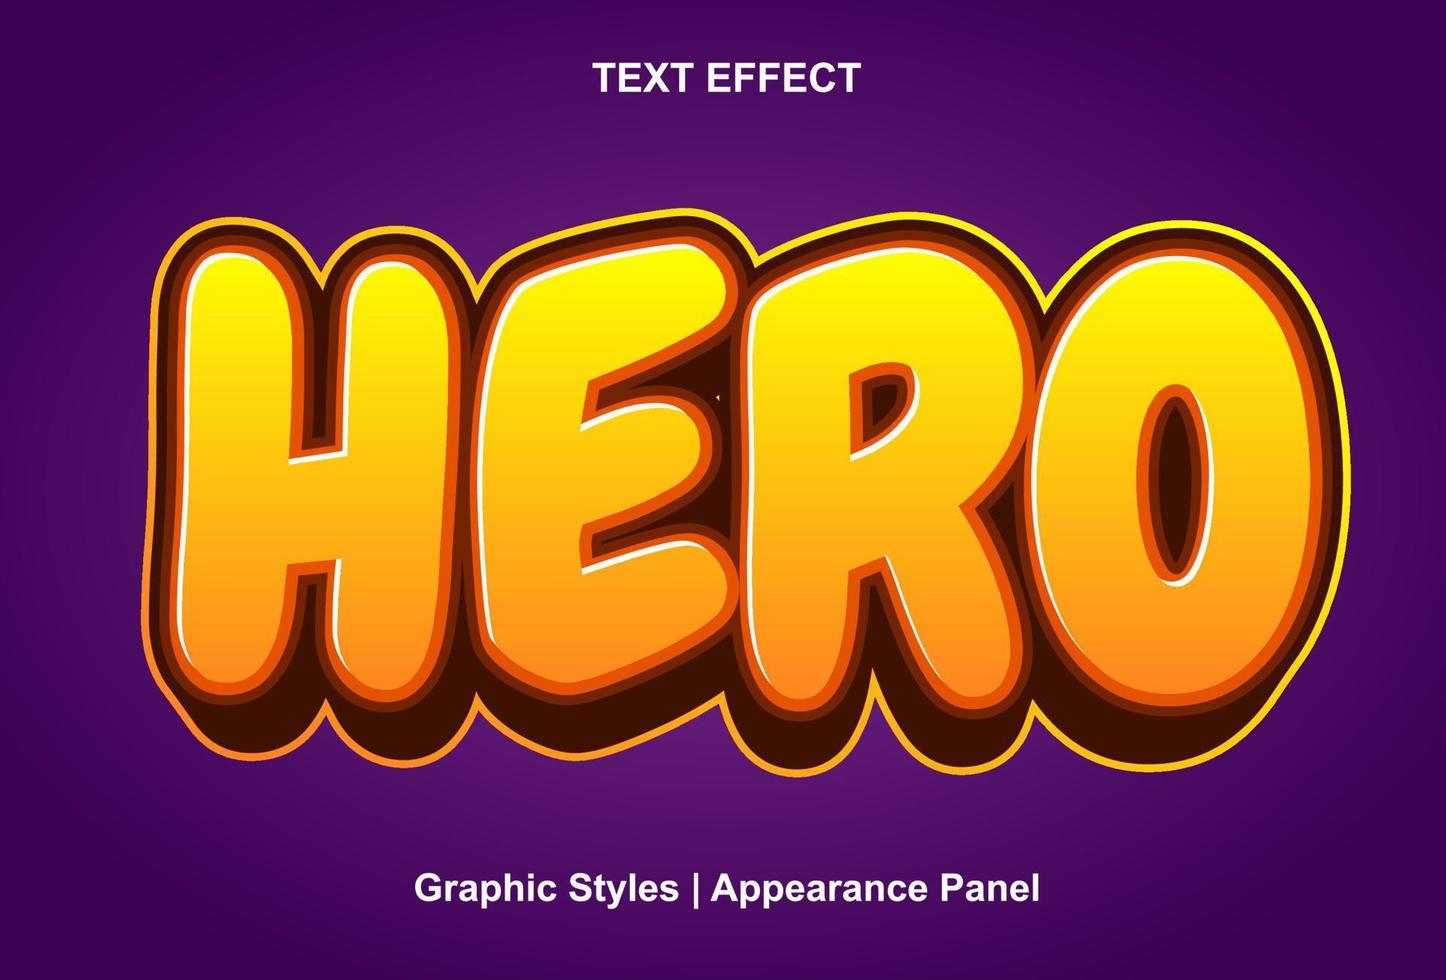 hero text effect with 3d style. vector